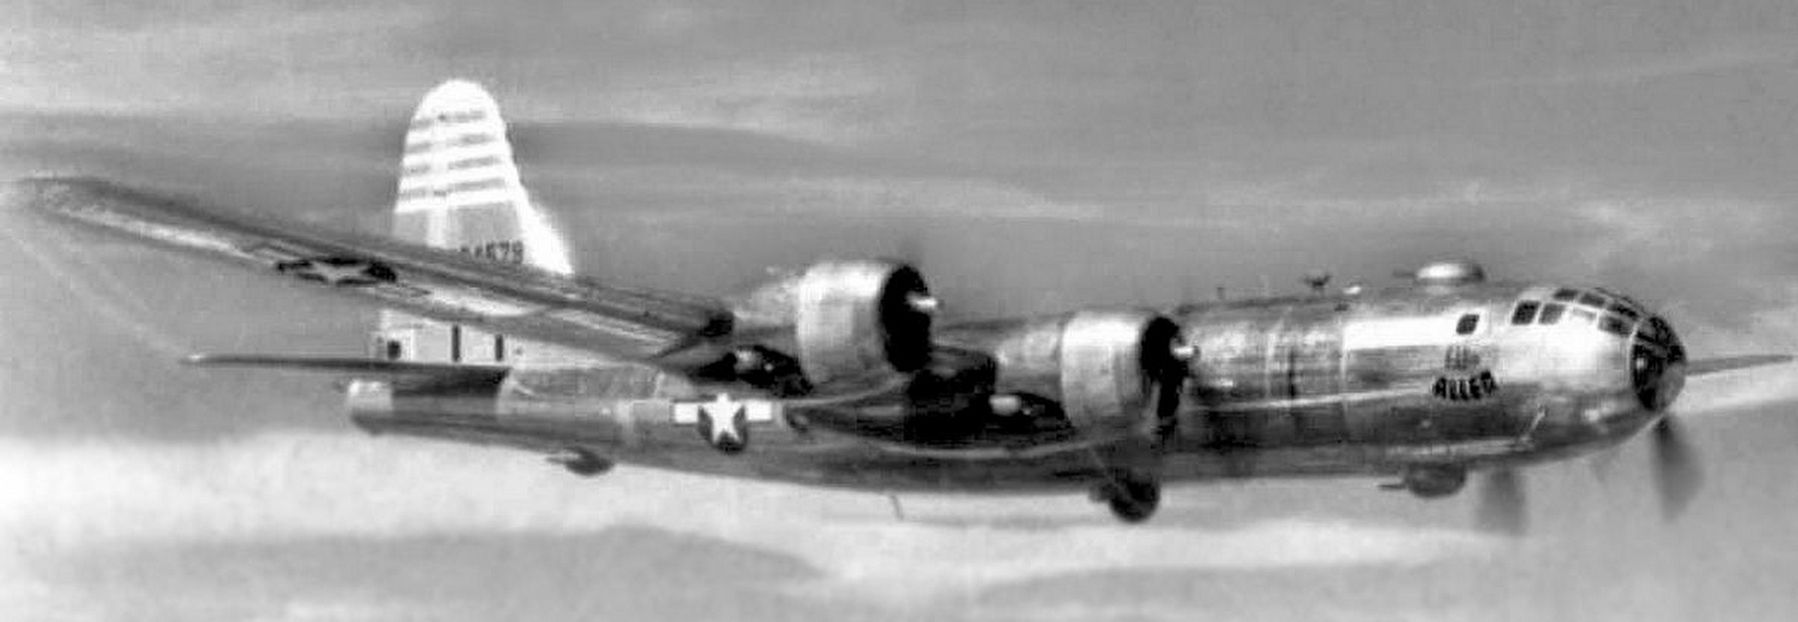 B-29 "Eddie Allen" of the 40th Bomb Group during a mission against rail yards in Rangoon, Burma. image. Click for full size.